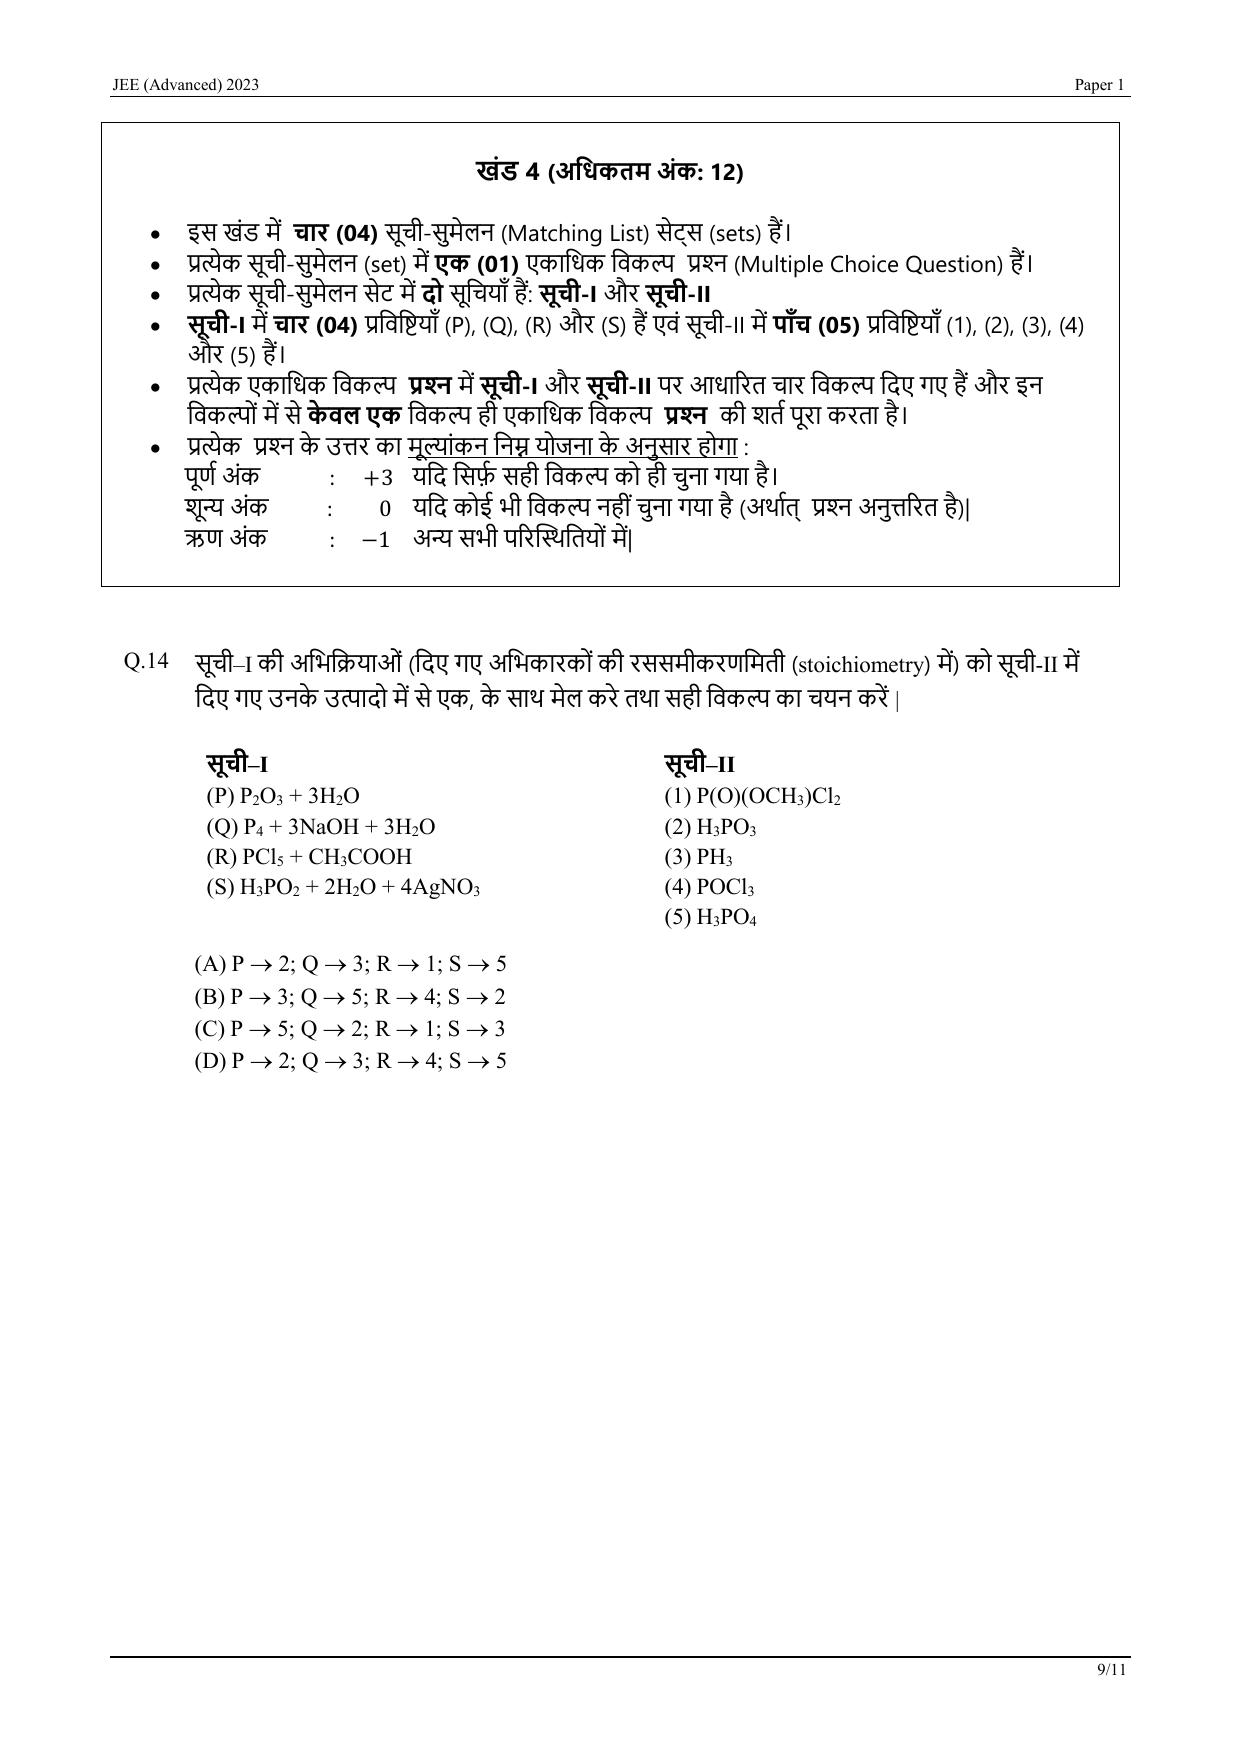 JEE Advanced 2023 Question Paper 1 (Hindi) - Page 29